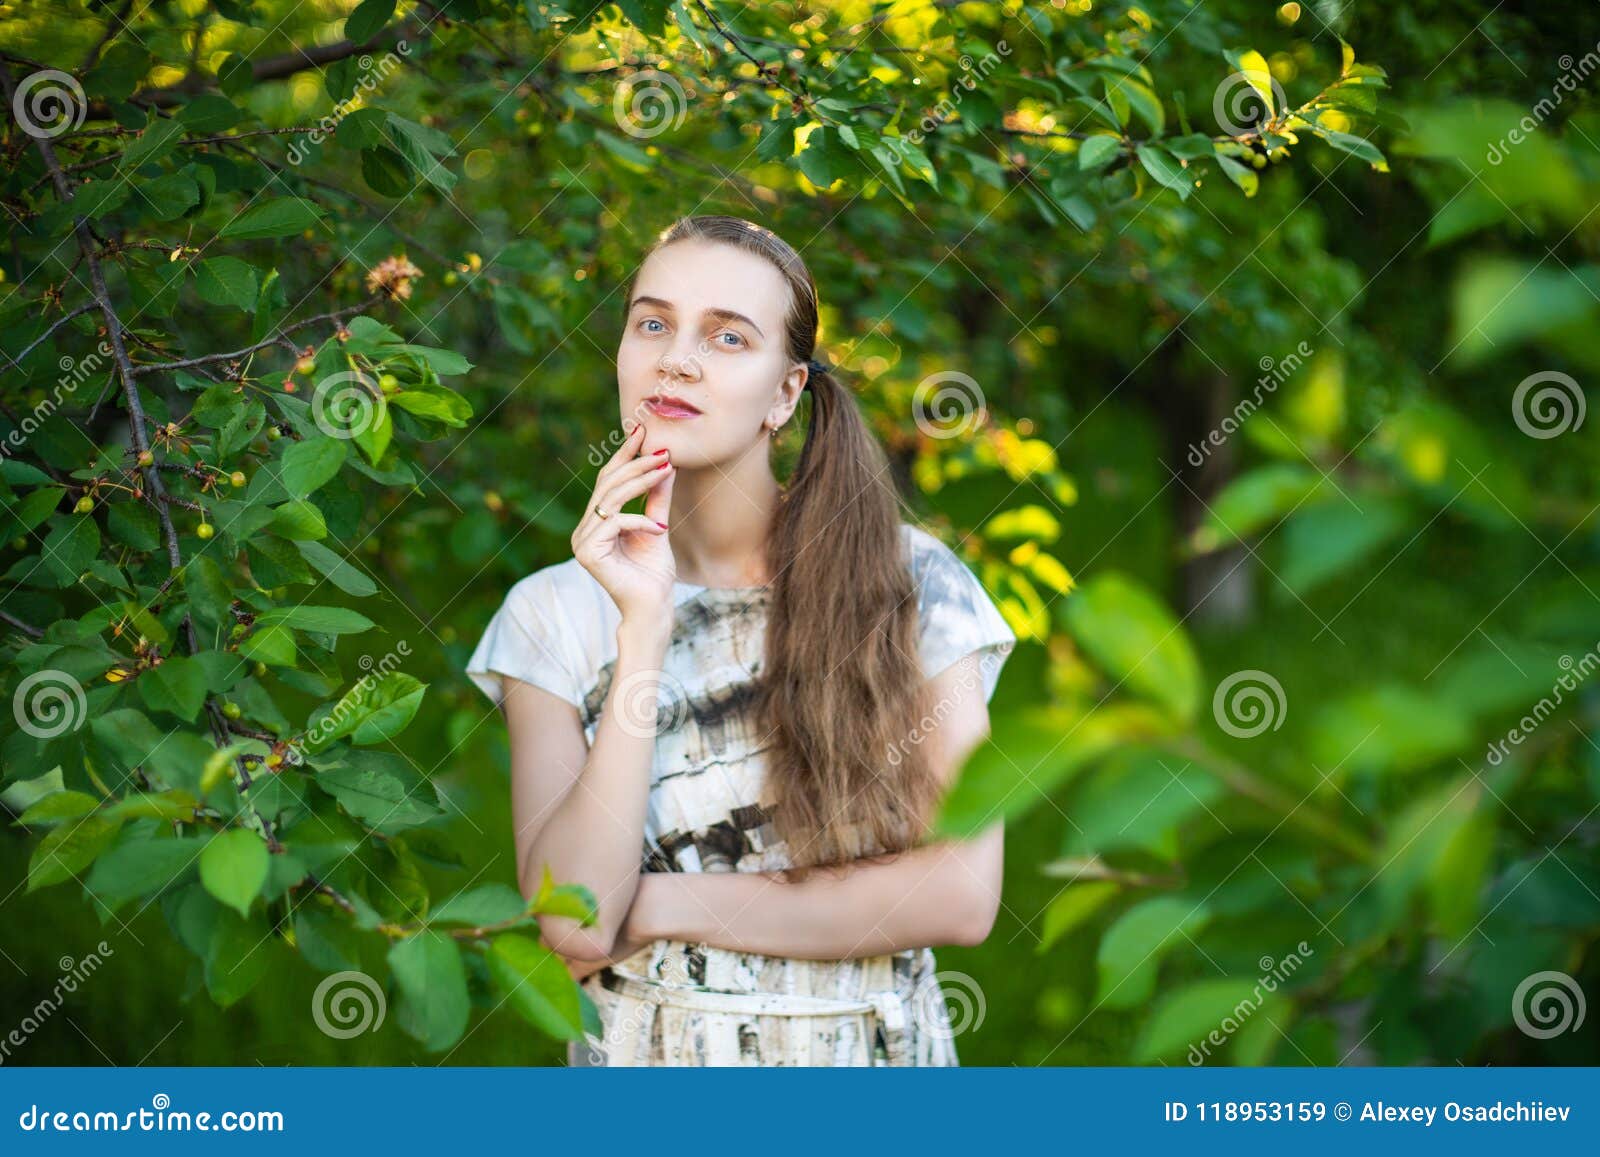 Beautiful Girl is Standing Near the Green Tree Stock Image - Image of ...